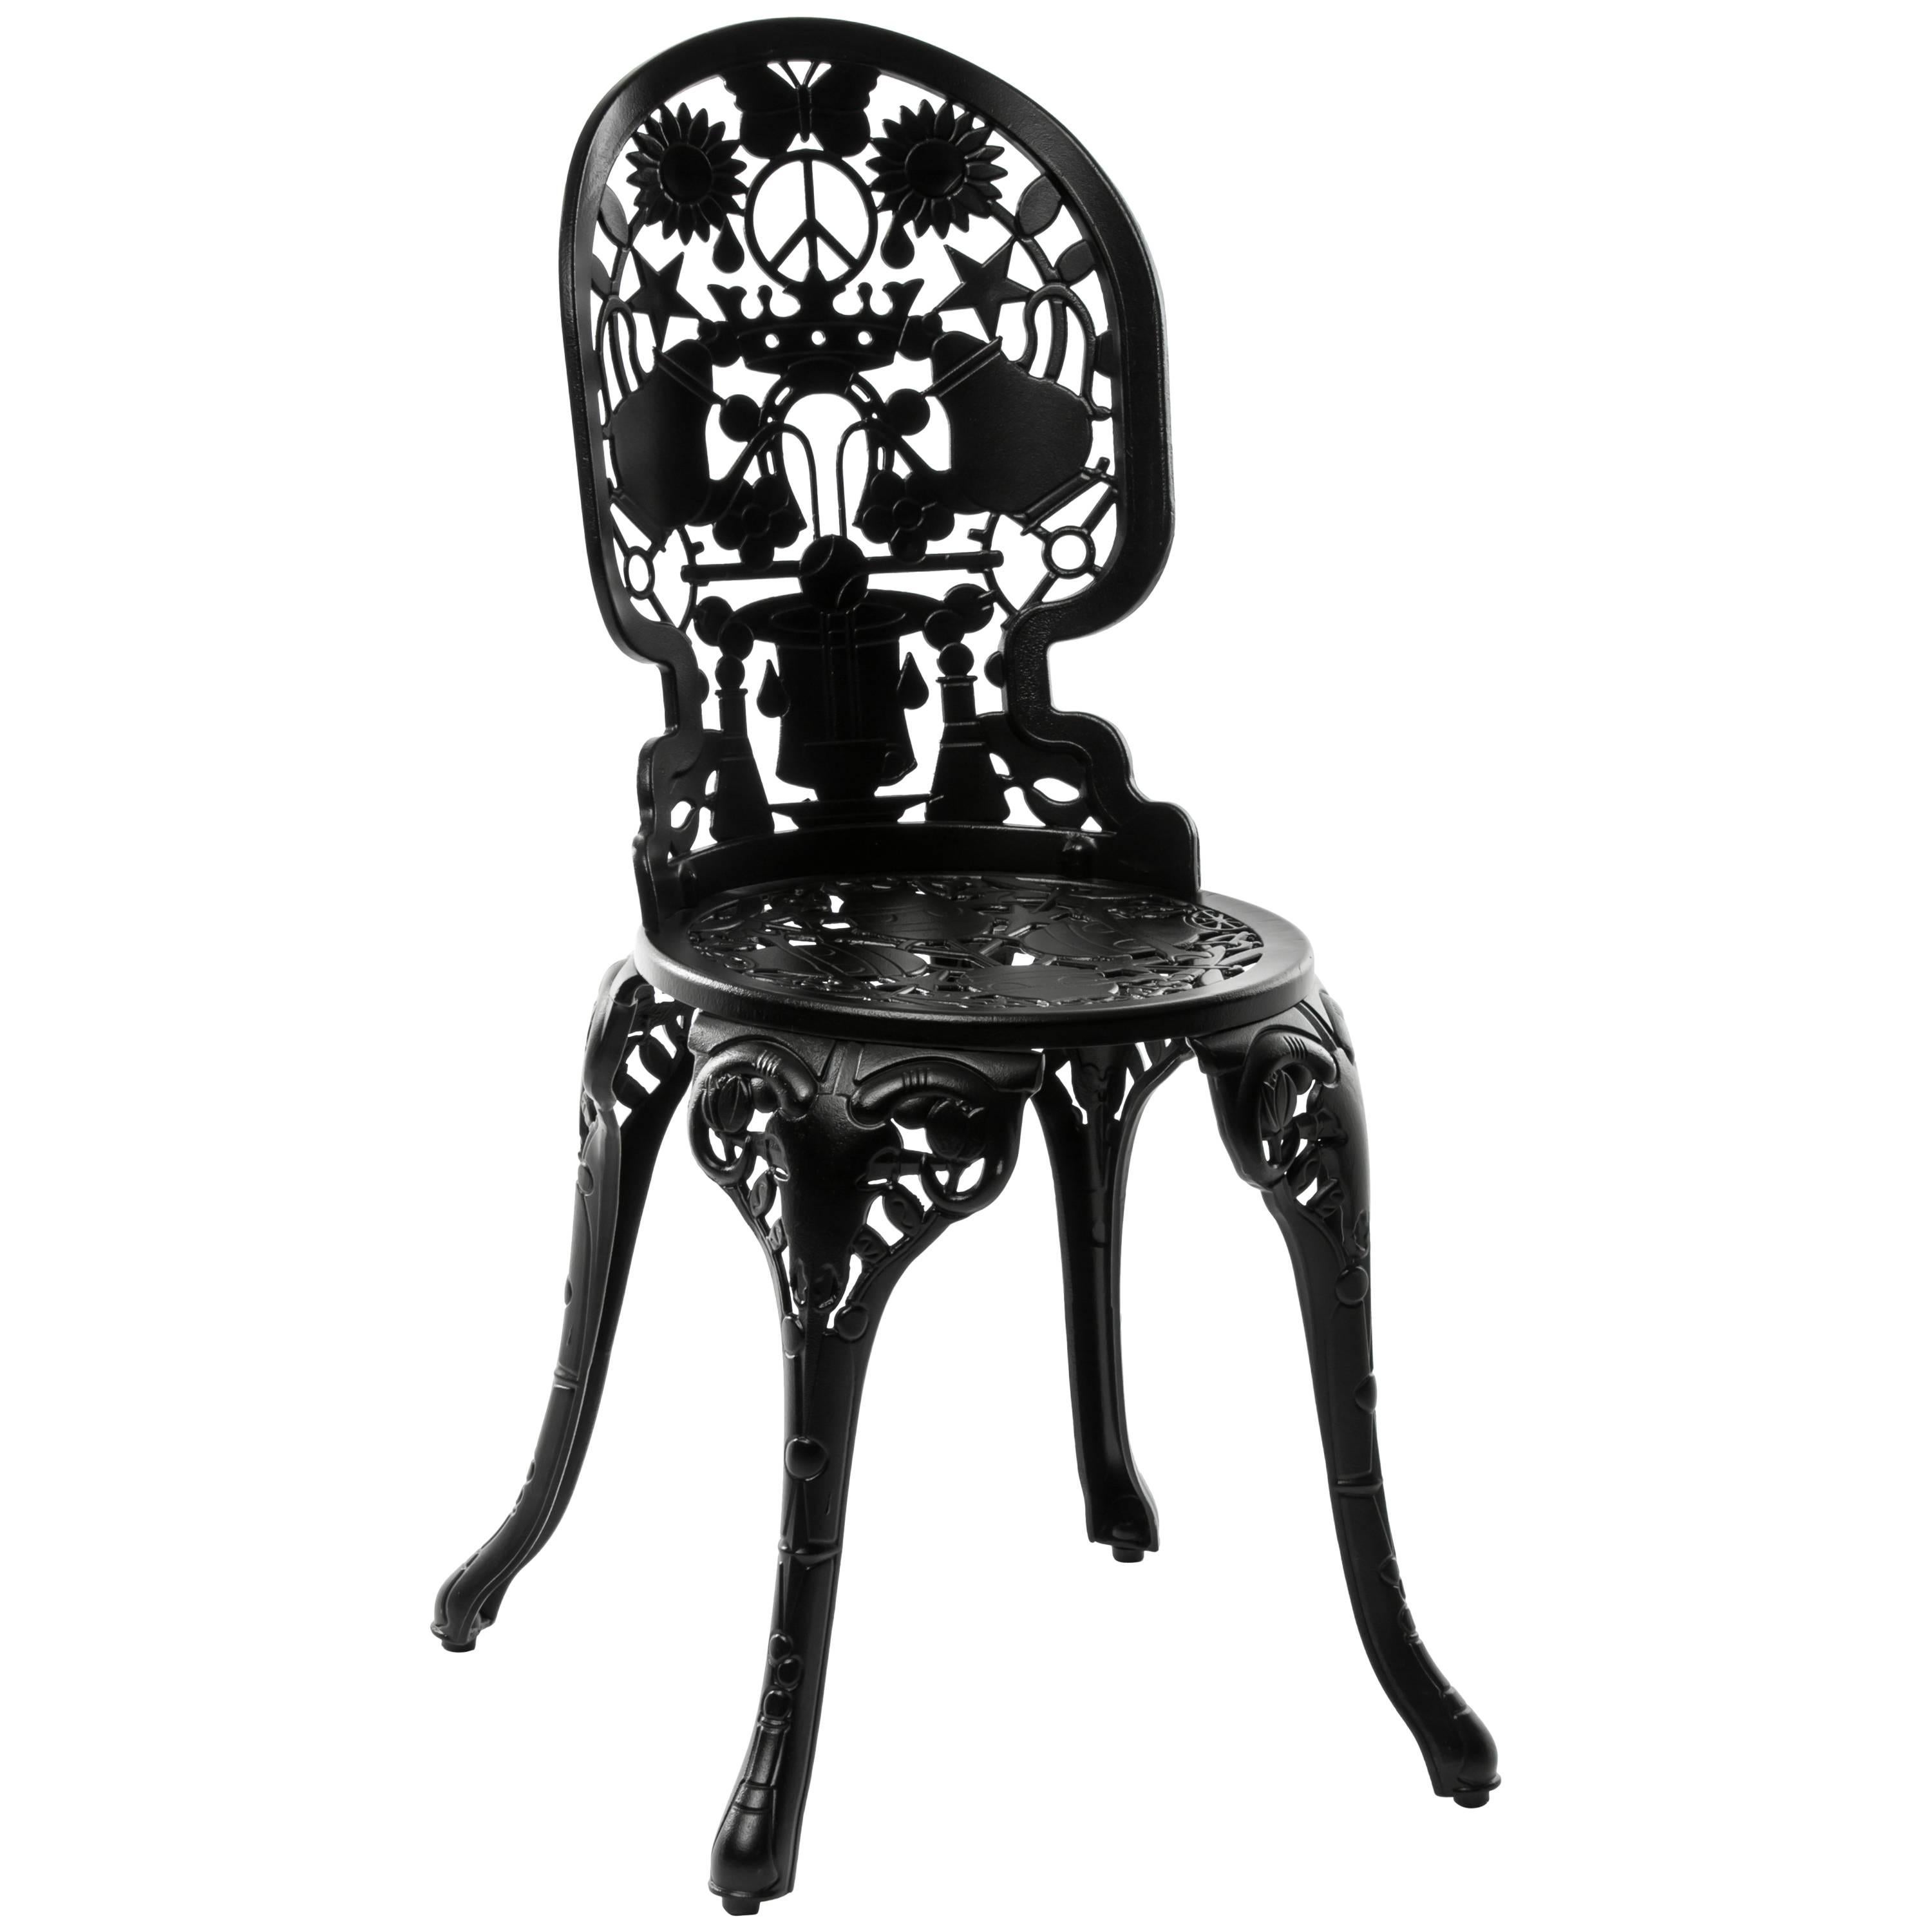 Aluminum Chair "Industry Garden Furniture" by Seletti, Black